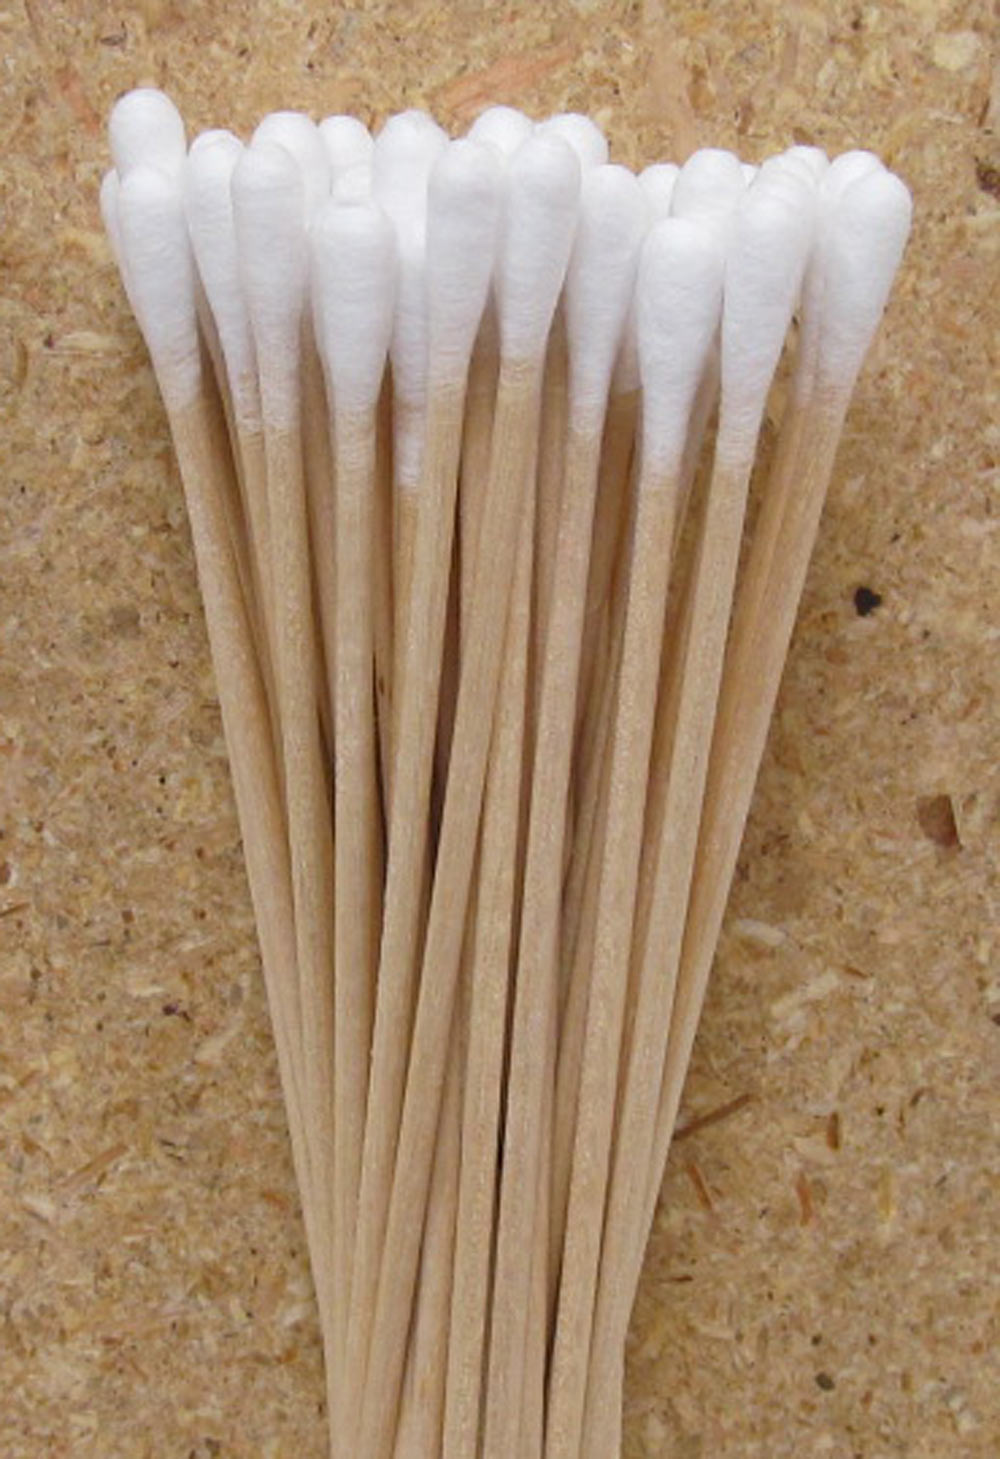 Low Lint Cotton Swabs